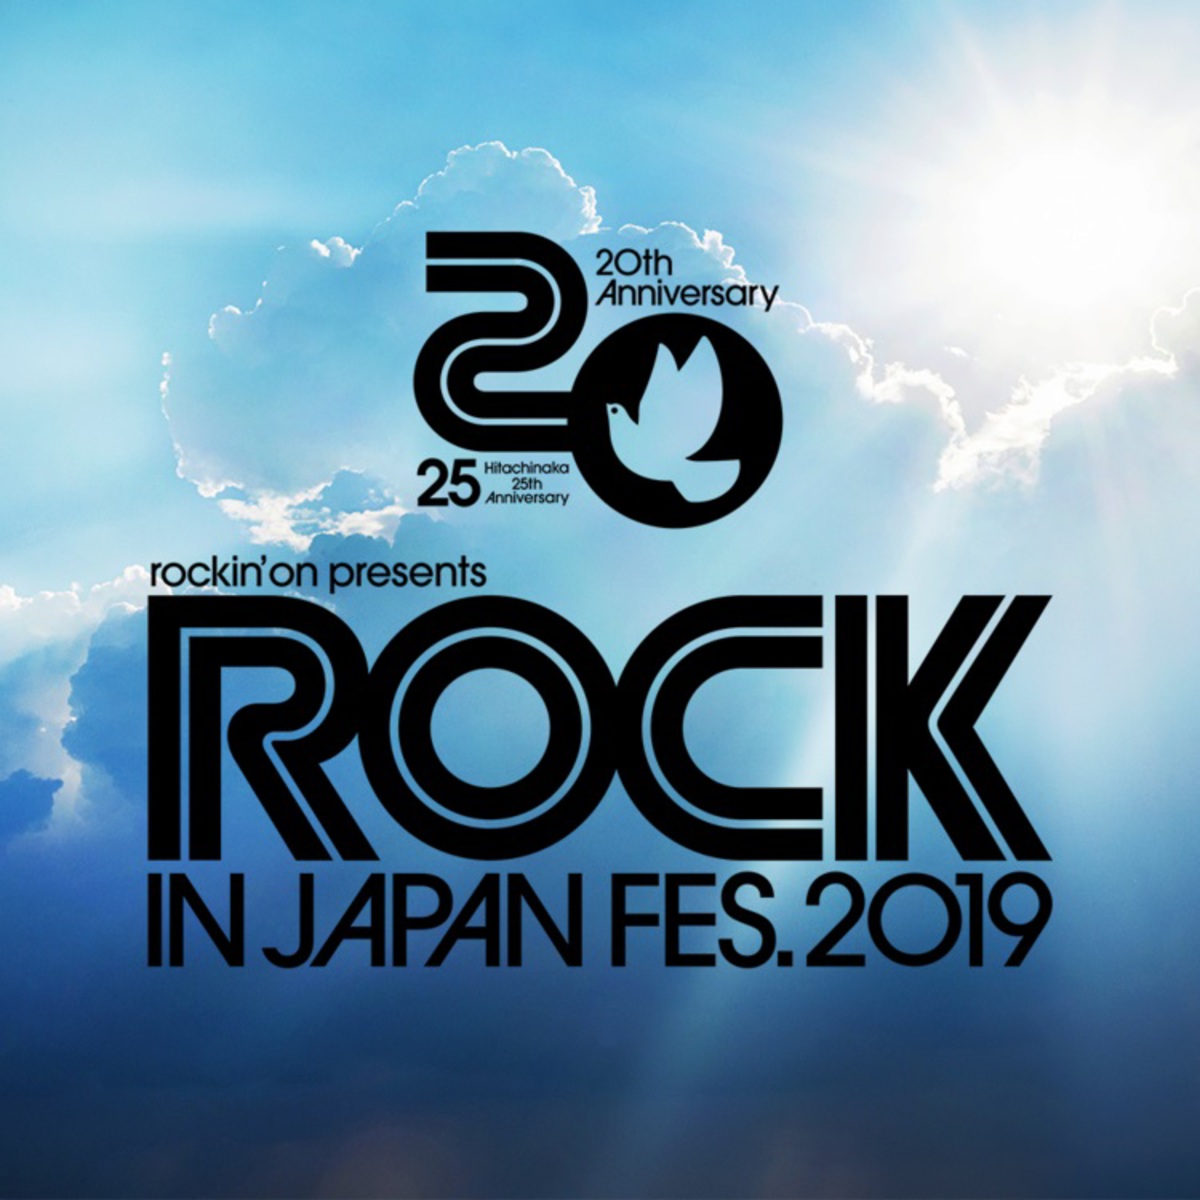 Rock In Japan Festival 19 第2弾出演者にロットン Dustbox G4n Locofrankら27組決定 激ロック ニュース